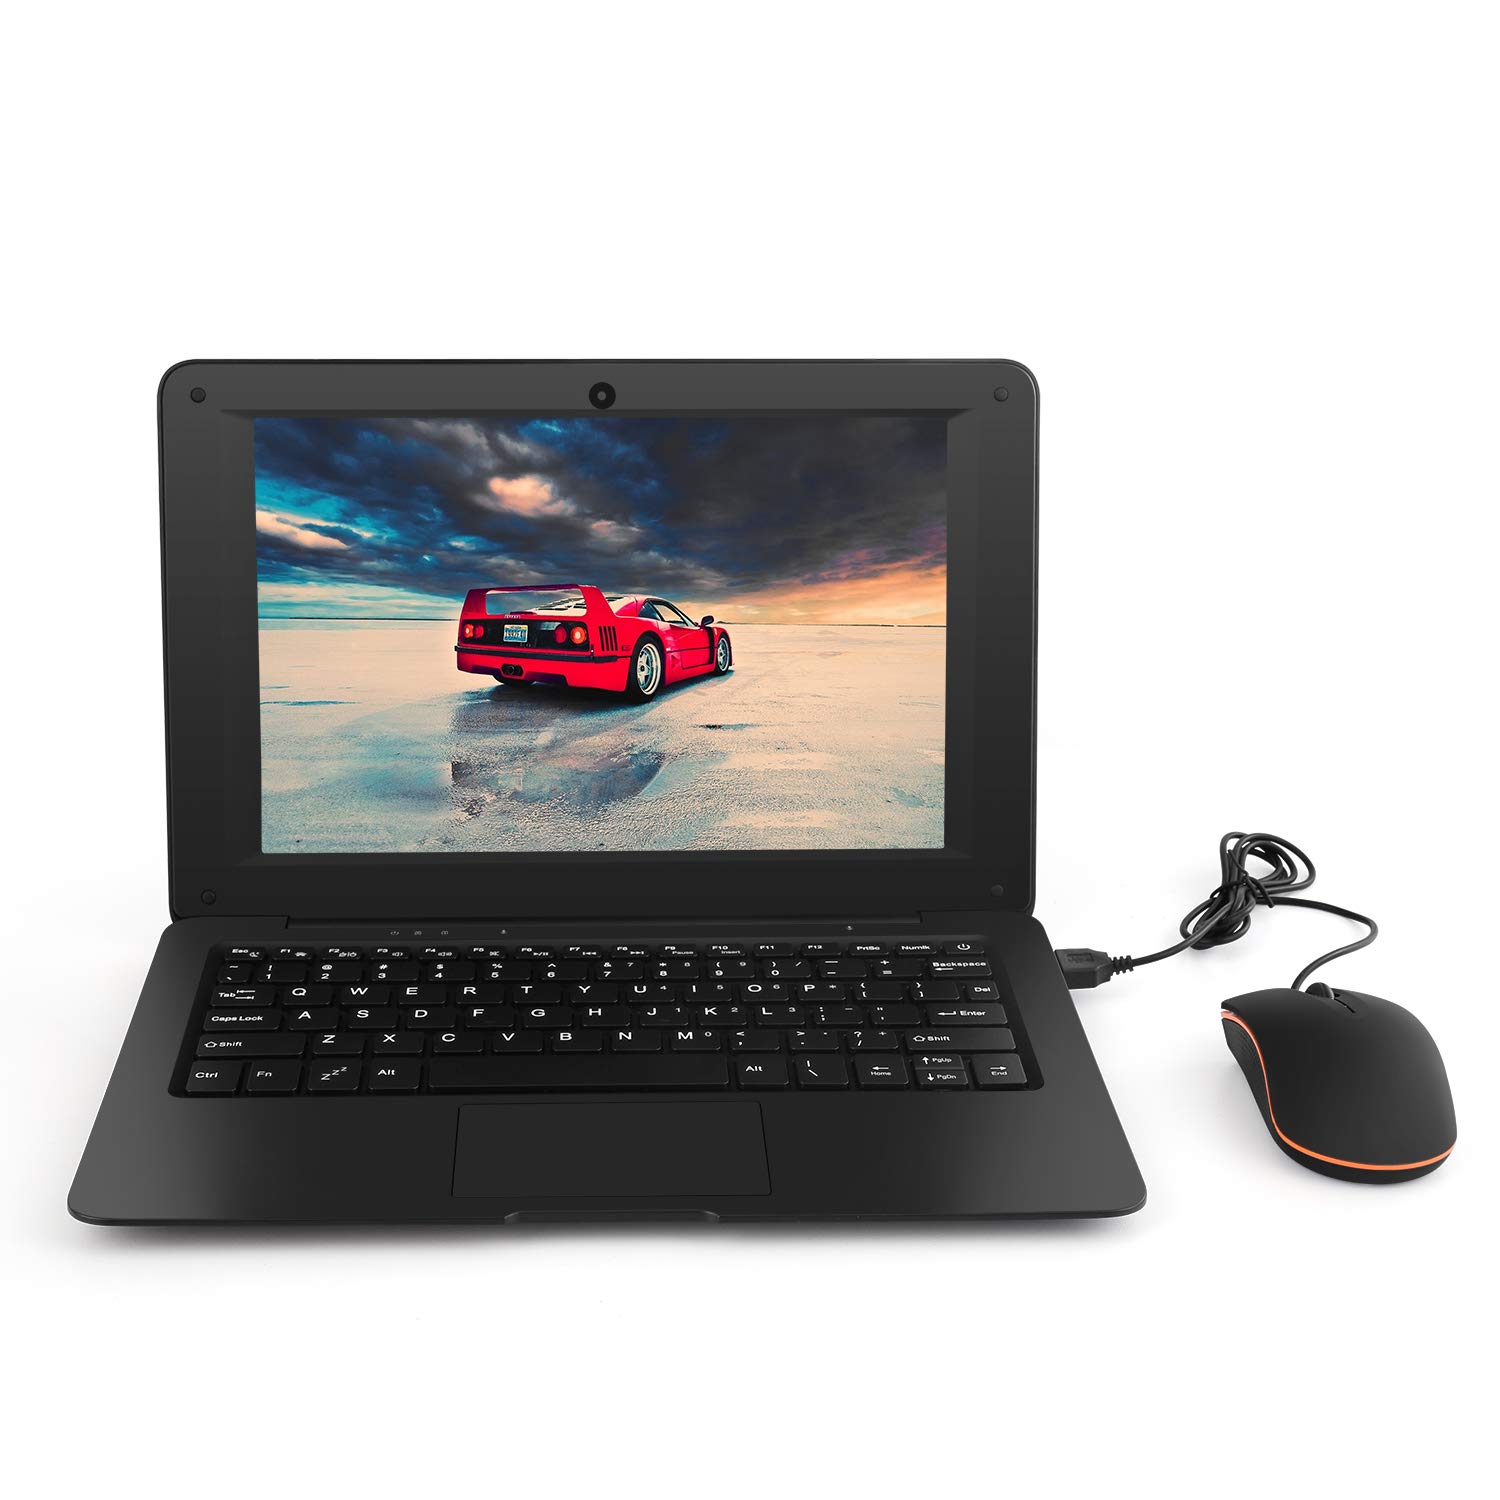 Goldengulf Portable 10.1 Inch Online Learning Computer Laptop Windows 10 OS Preinstalled Quad Core 32GB Netbook HDMI Webcam Office Netflix YouTube (Black)